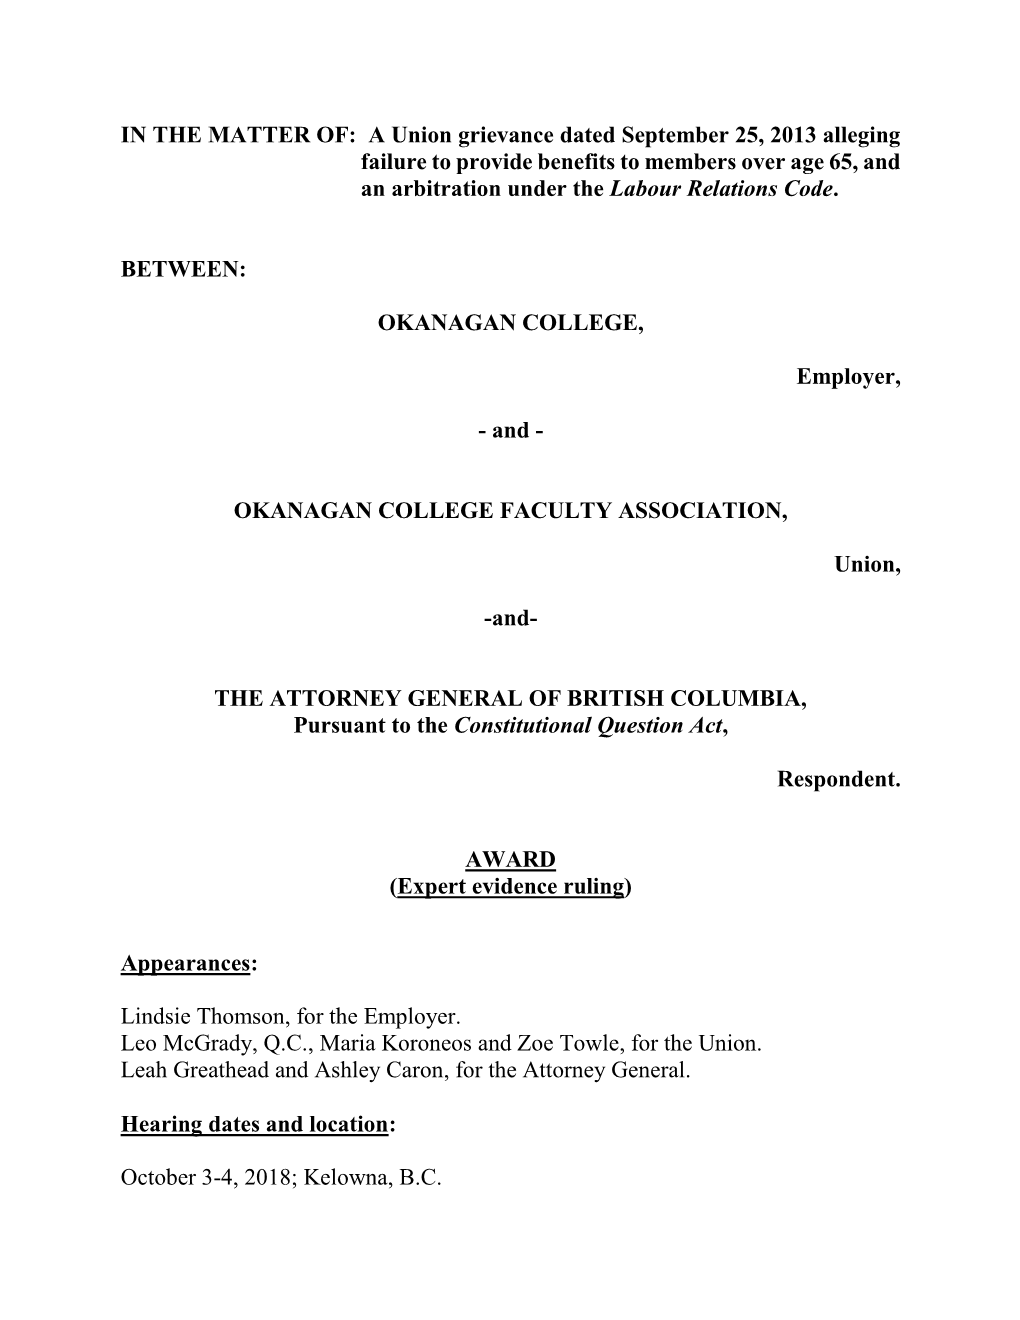 A Union Grievance Dated September 25, 2013 Alleging Failure to Provide Benefits to Members Over Age 65, and an Arbitration Under the Labour Relations Code